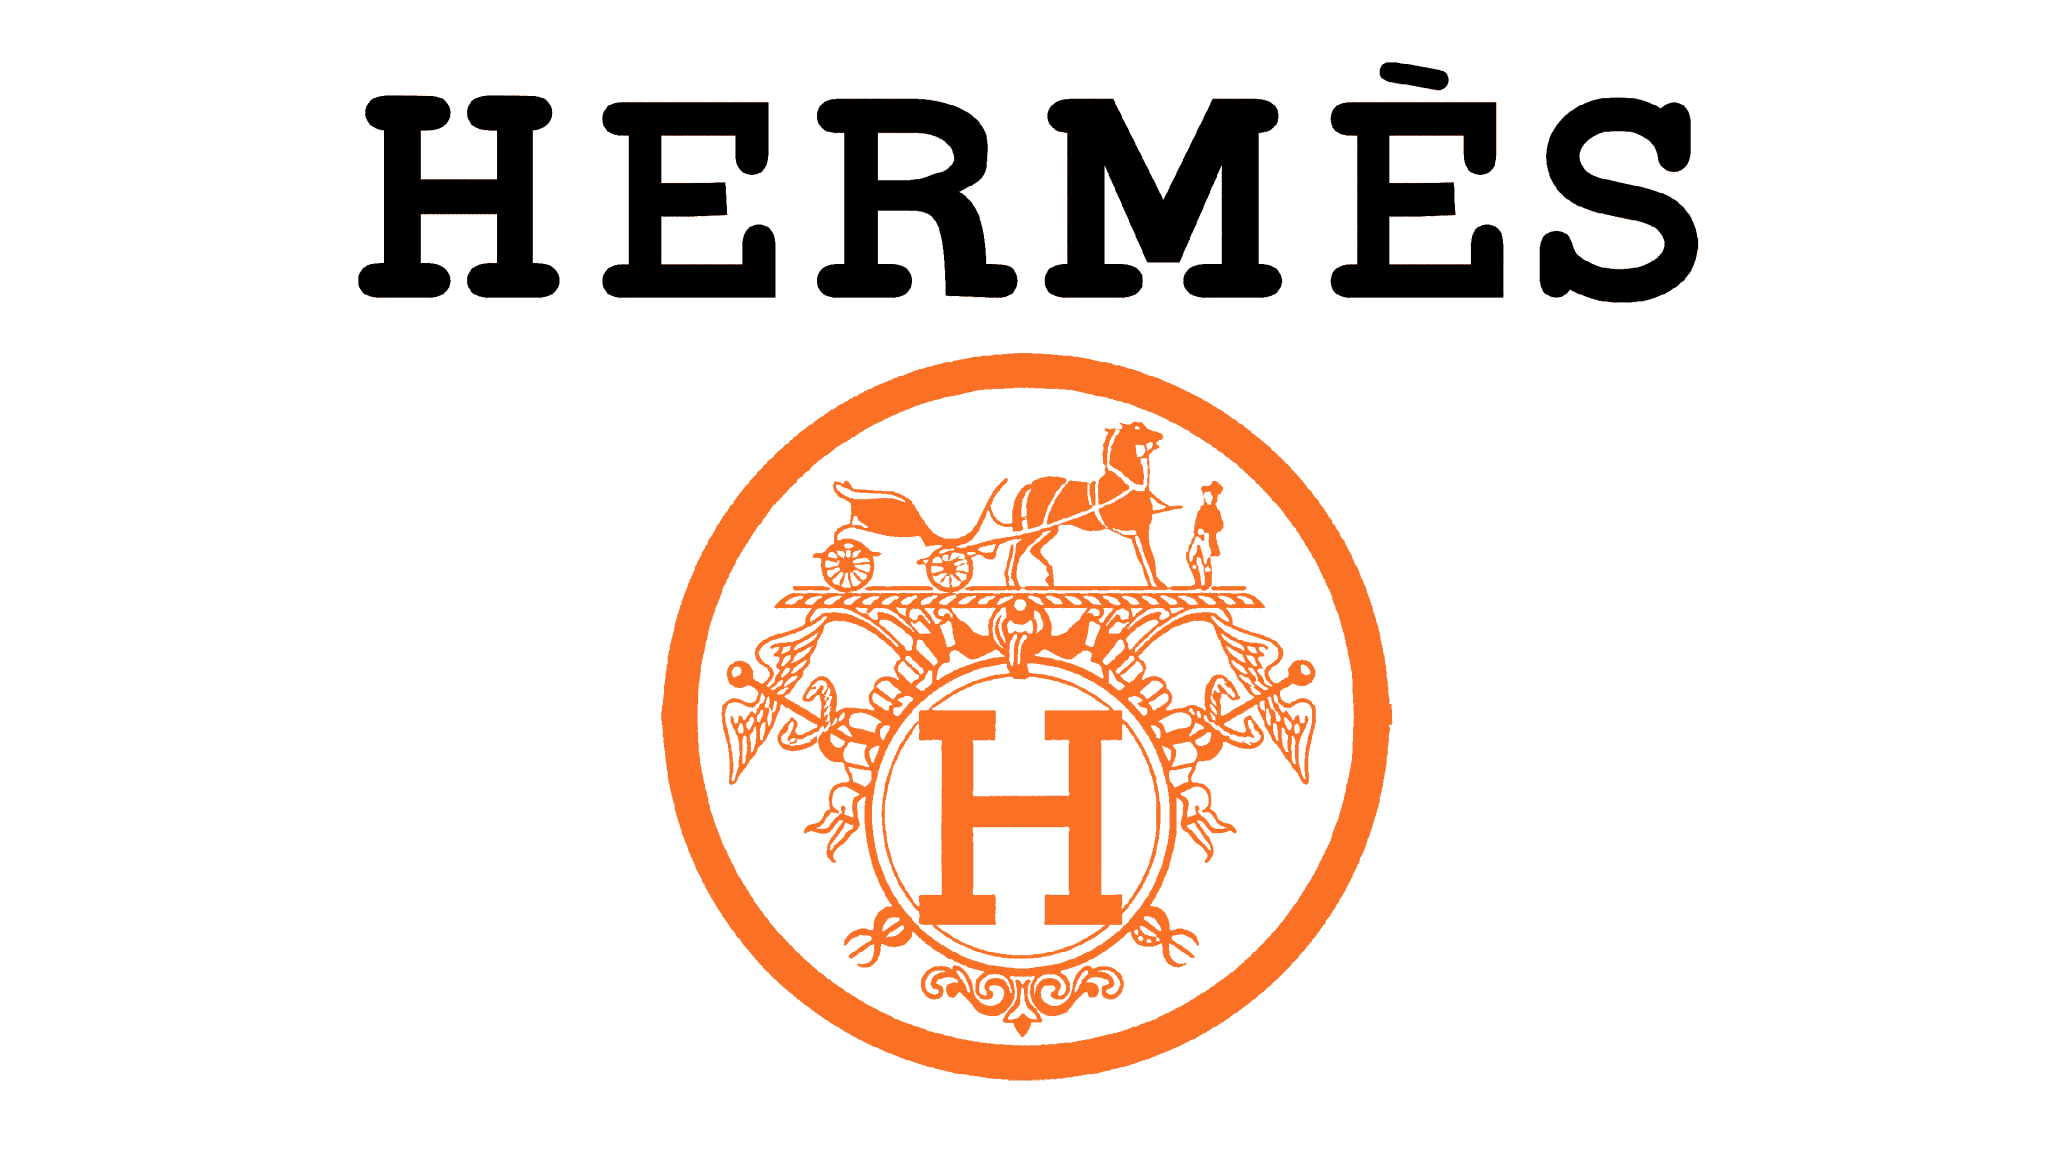 Hermes Logo and symbol, meaning, history, sign.